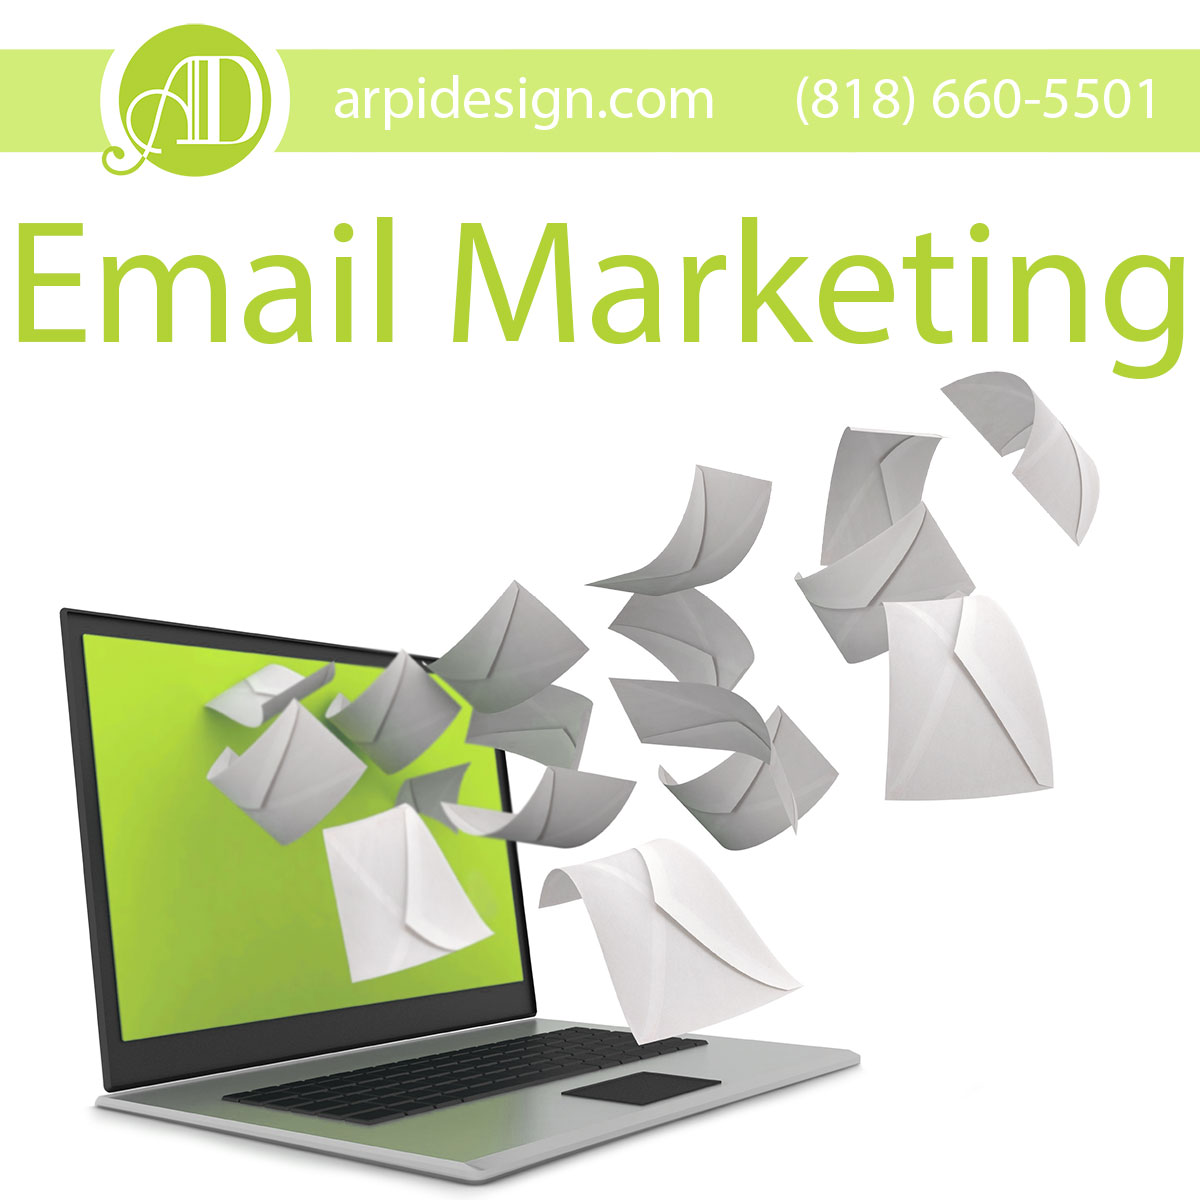 Email Marketing in Los Angeles